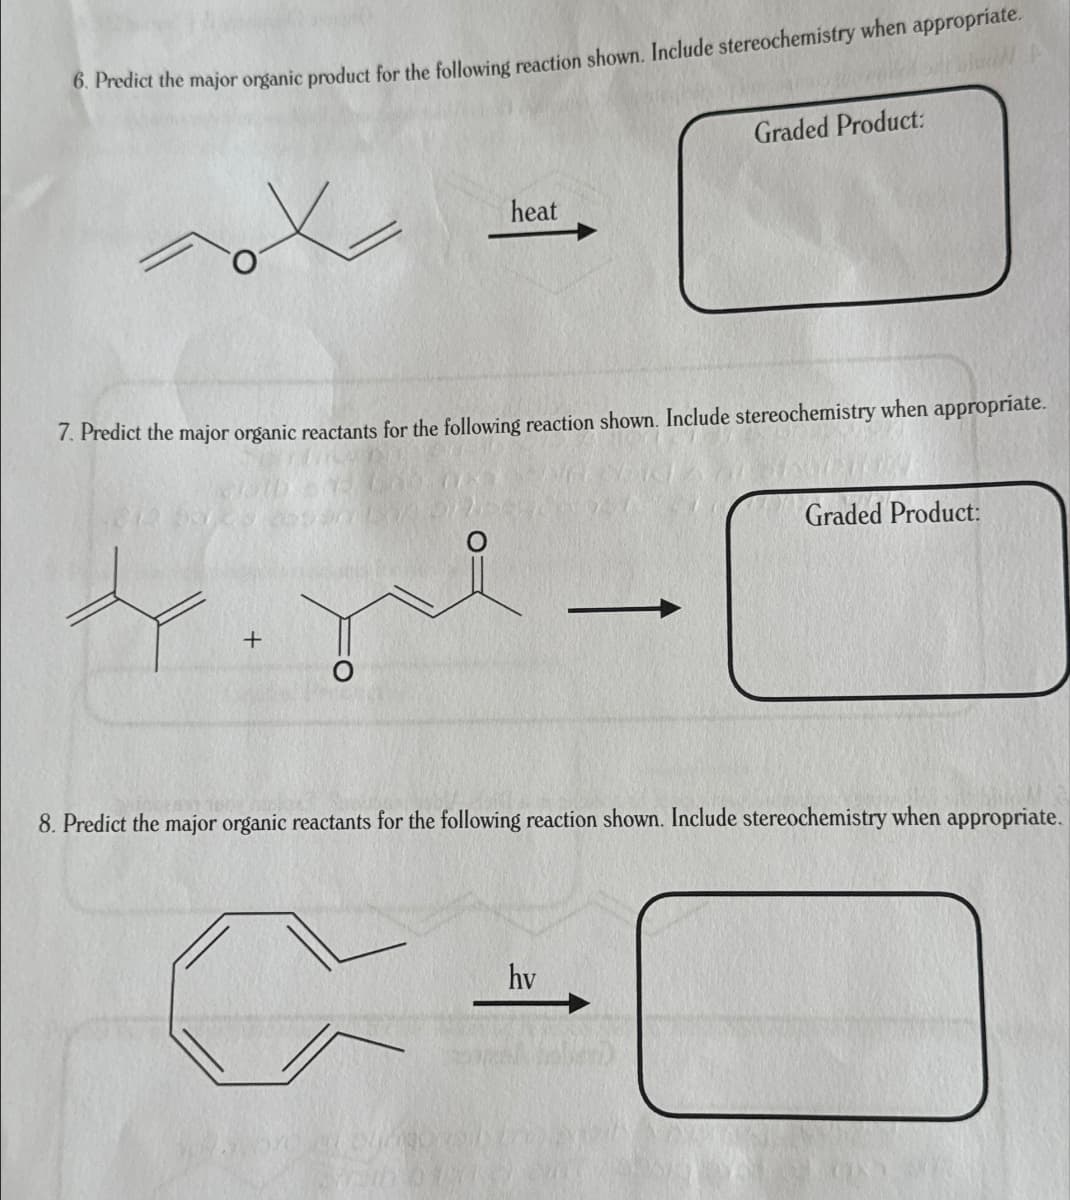 6. Predict the major organic product for the following reaction shown. Include stereochemistry when appropriate.
Graded Product:
heat
7. Predict the major organic reactants for the following reaction shown. Include stereochemistry when appropriate.
+
Graded Product:
8. Predict the major organic reactants for the following reaction shown. Include stereochemistry when appropriate.
hv